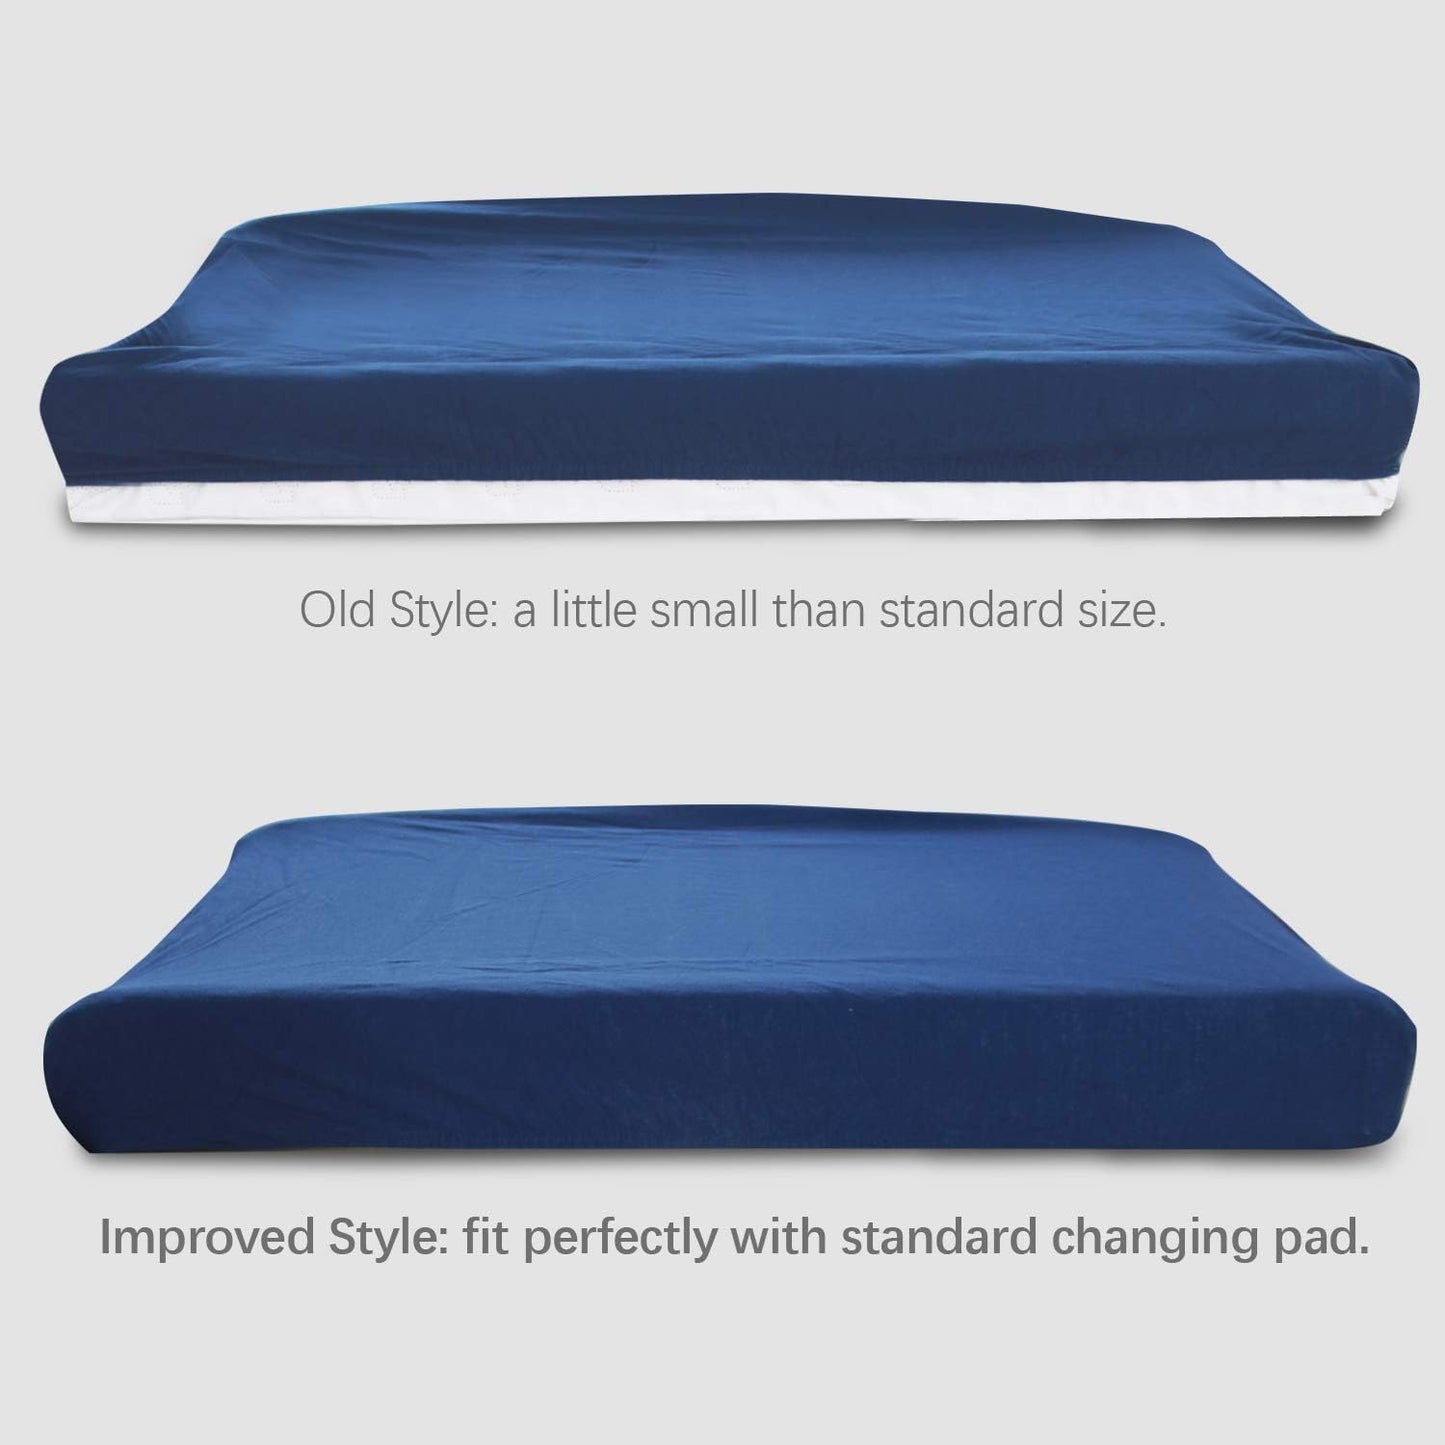 Waterproof Changing Pad Cover - 2 Pack, Ultra-Soft Microfiber, Smooth & Breathable, Aqua & Navy